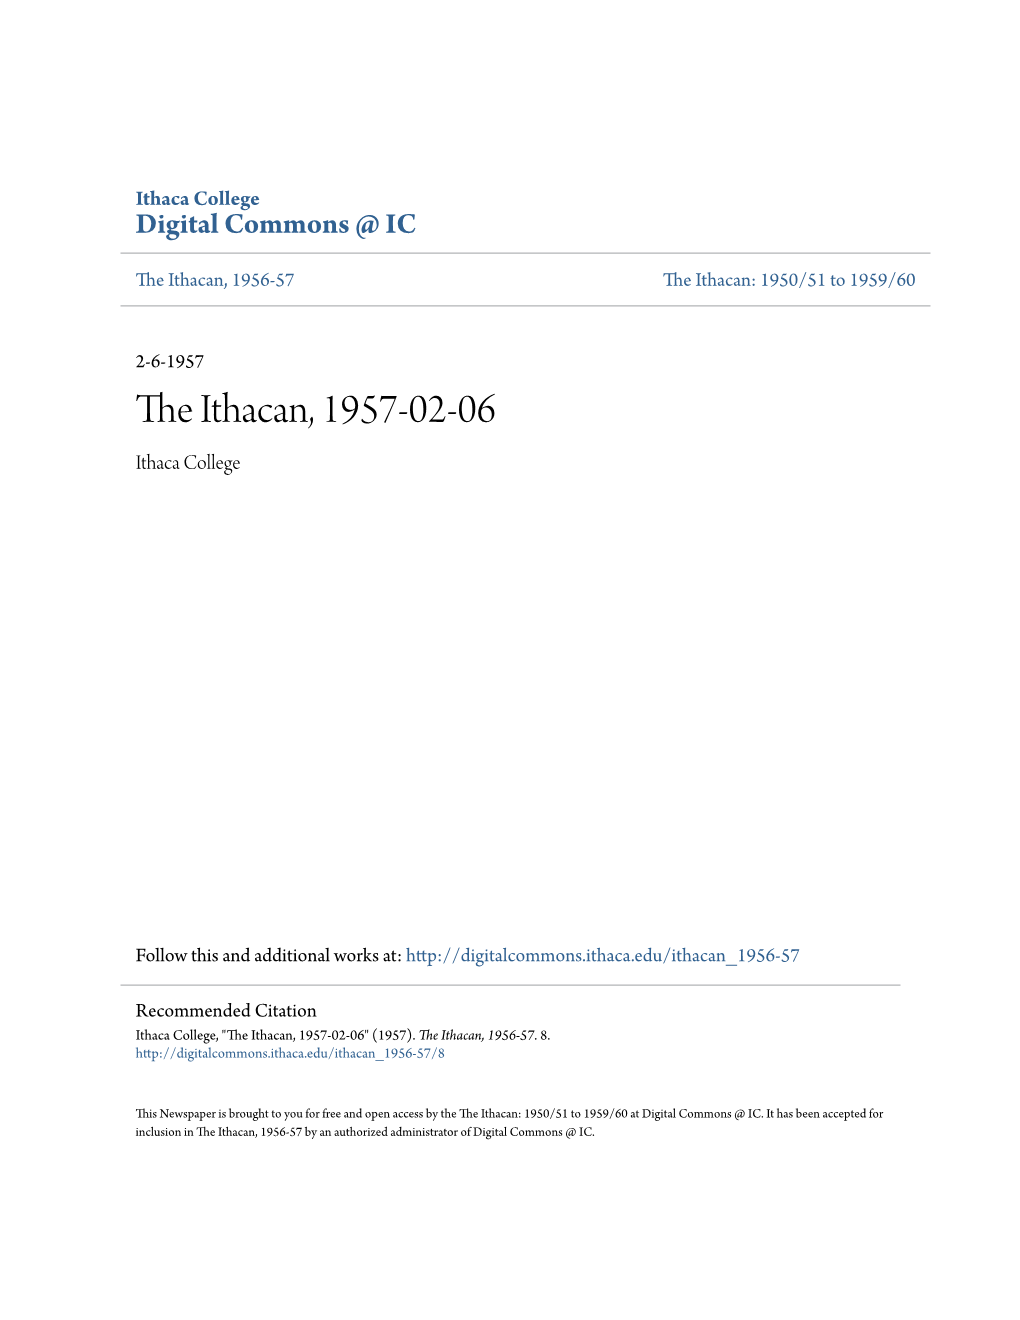 The Ithacan, 1957-02-06